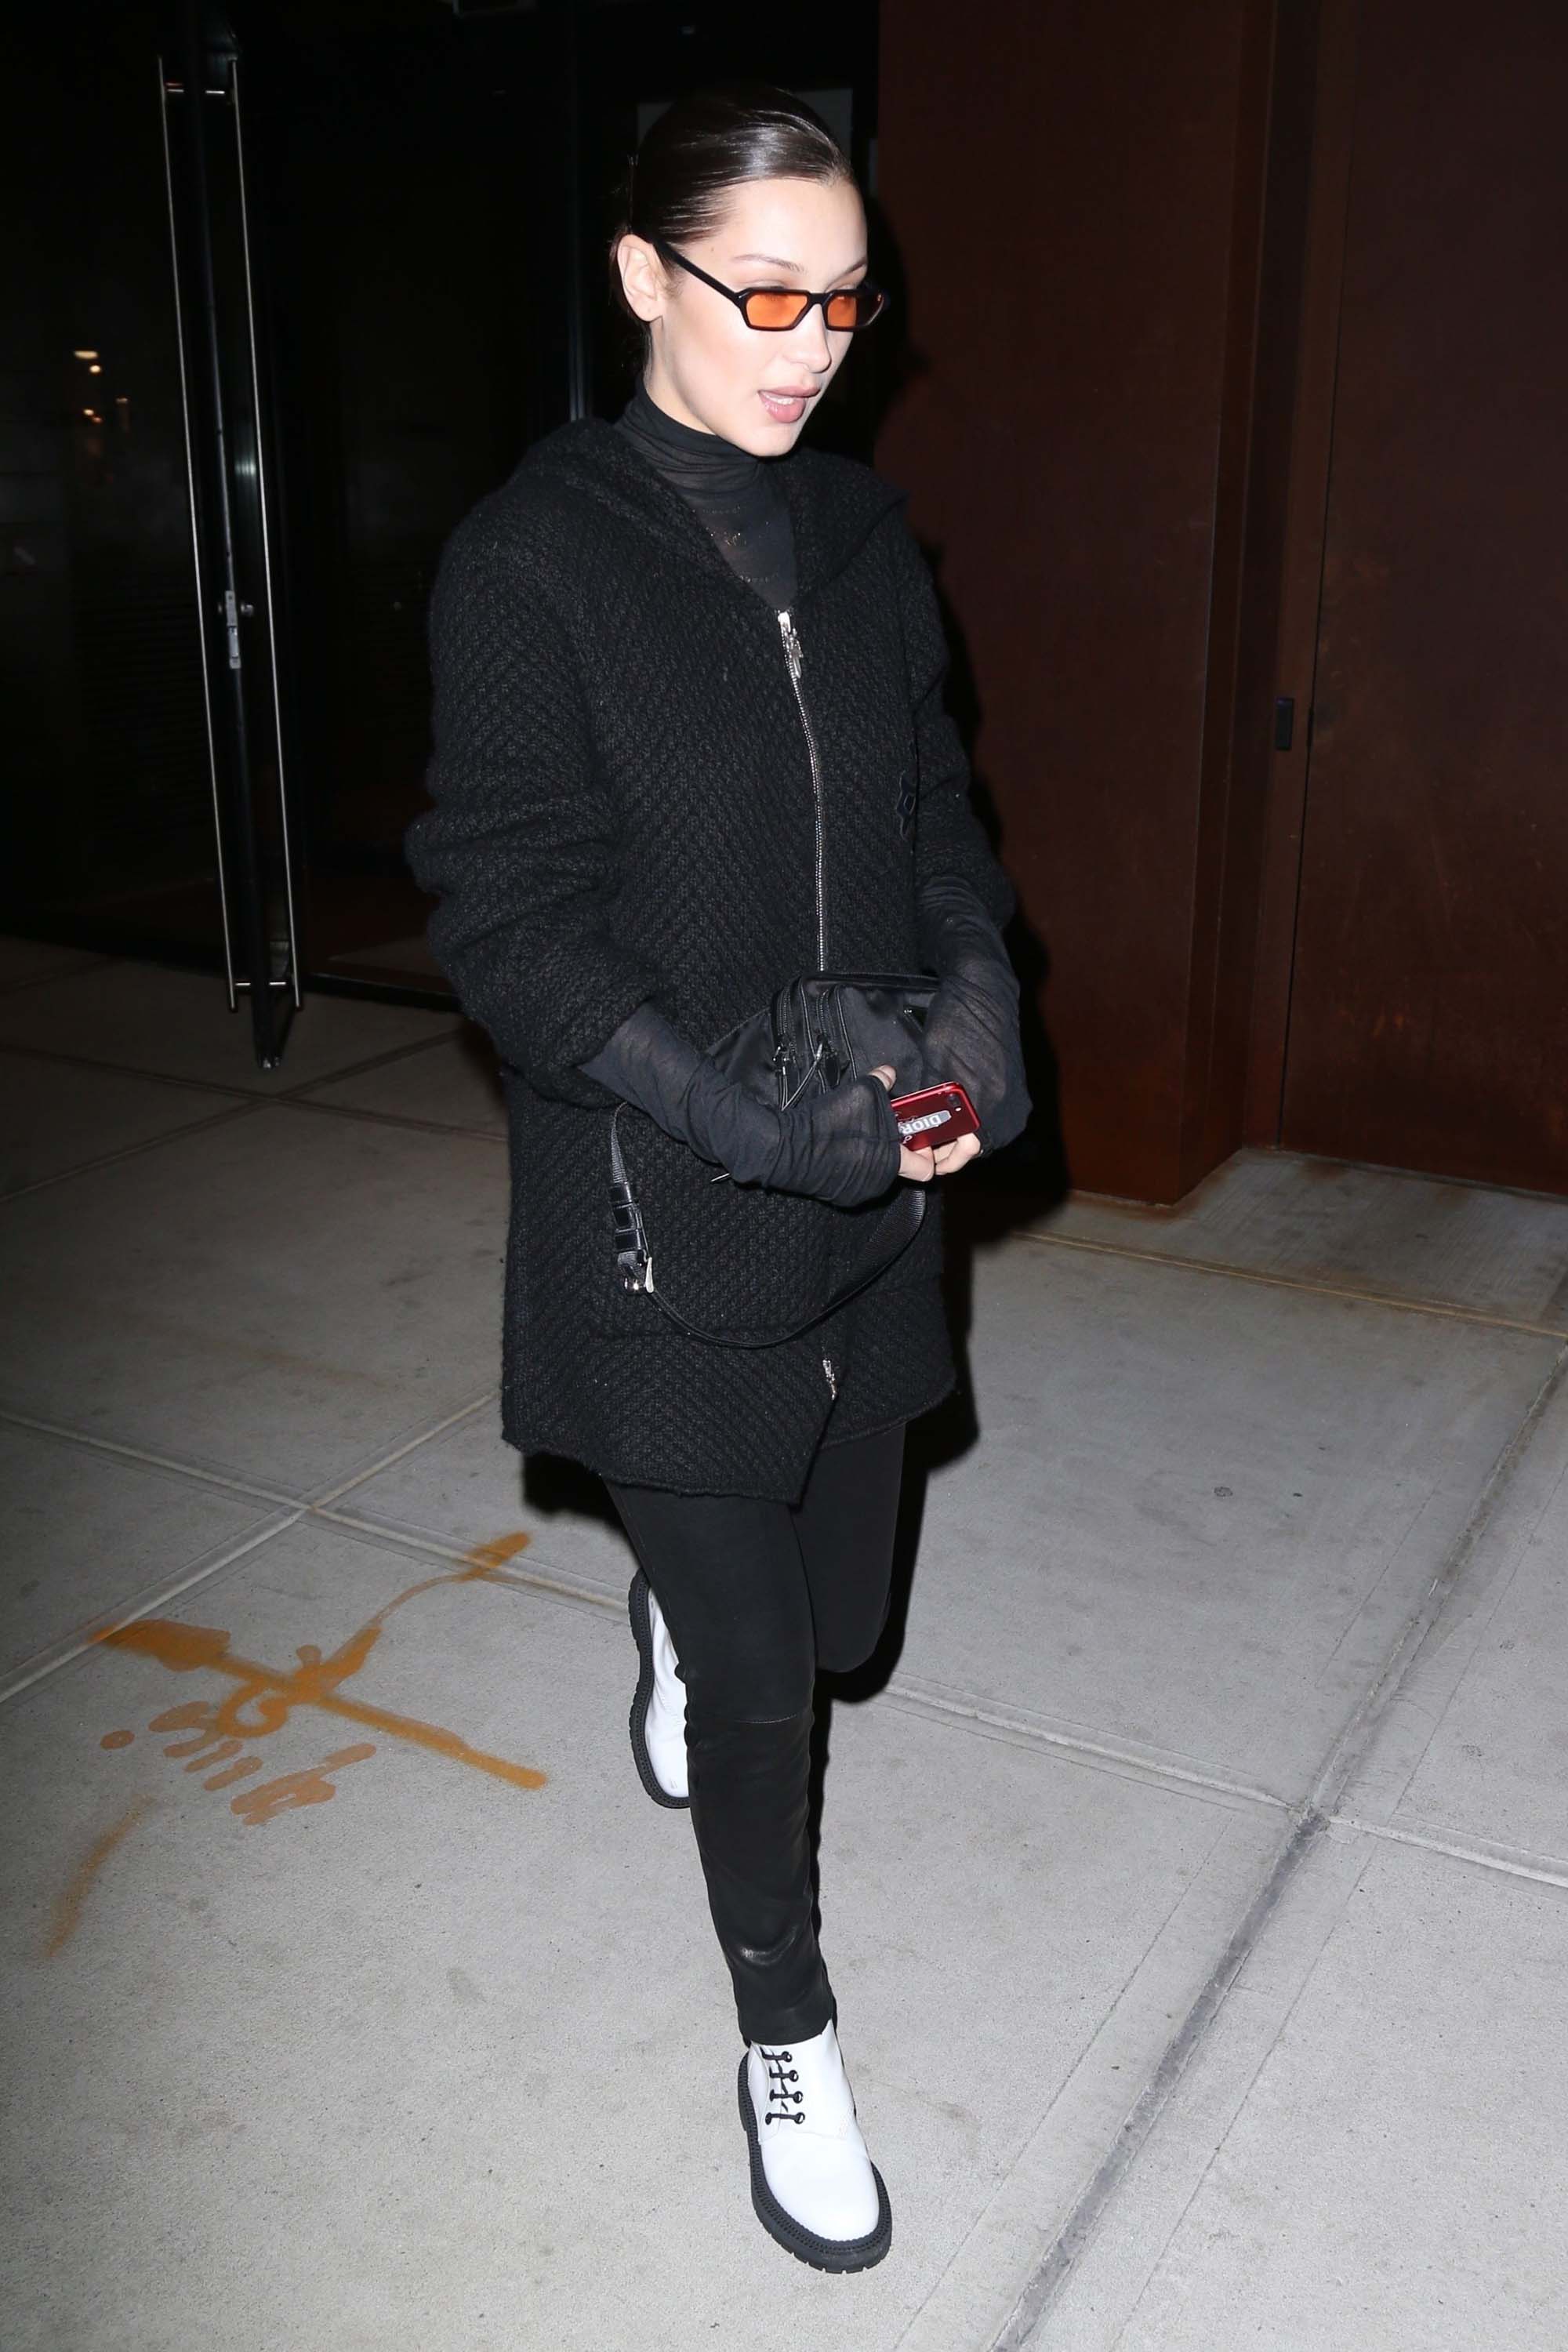 Bella Hadid steps out in NYC